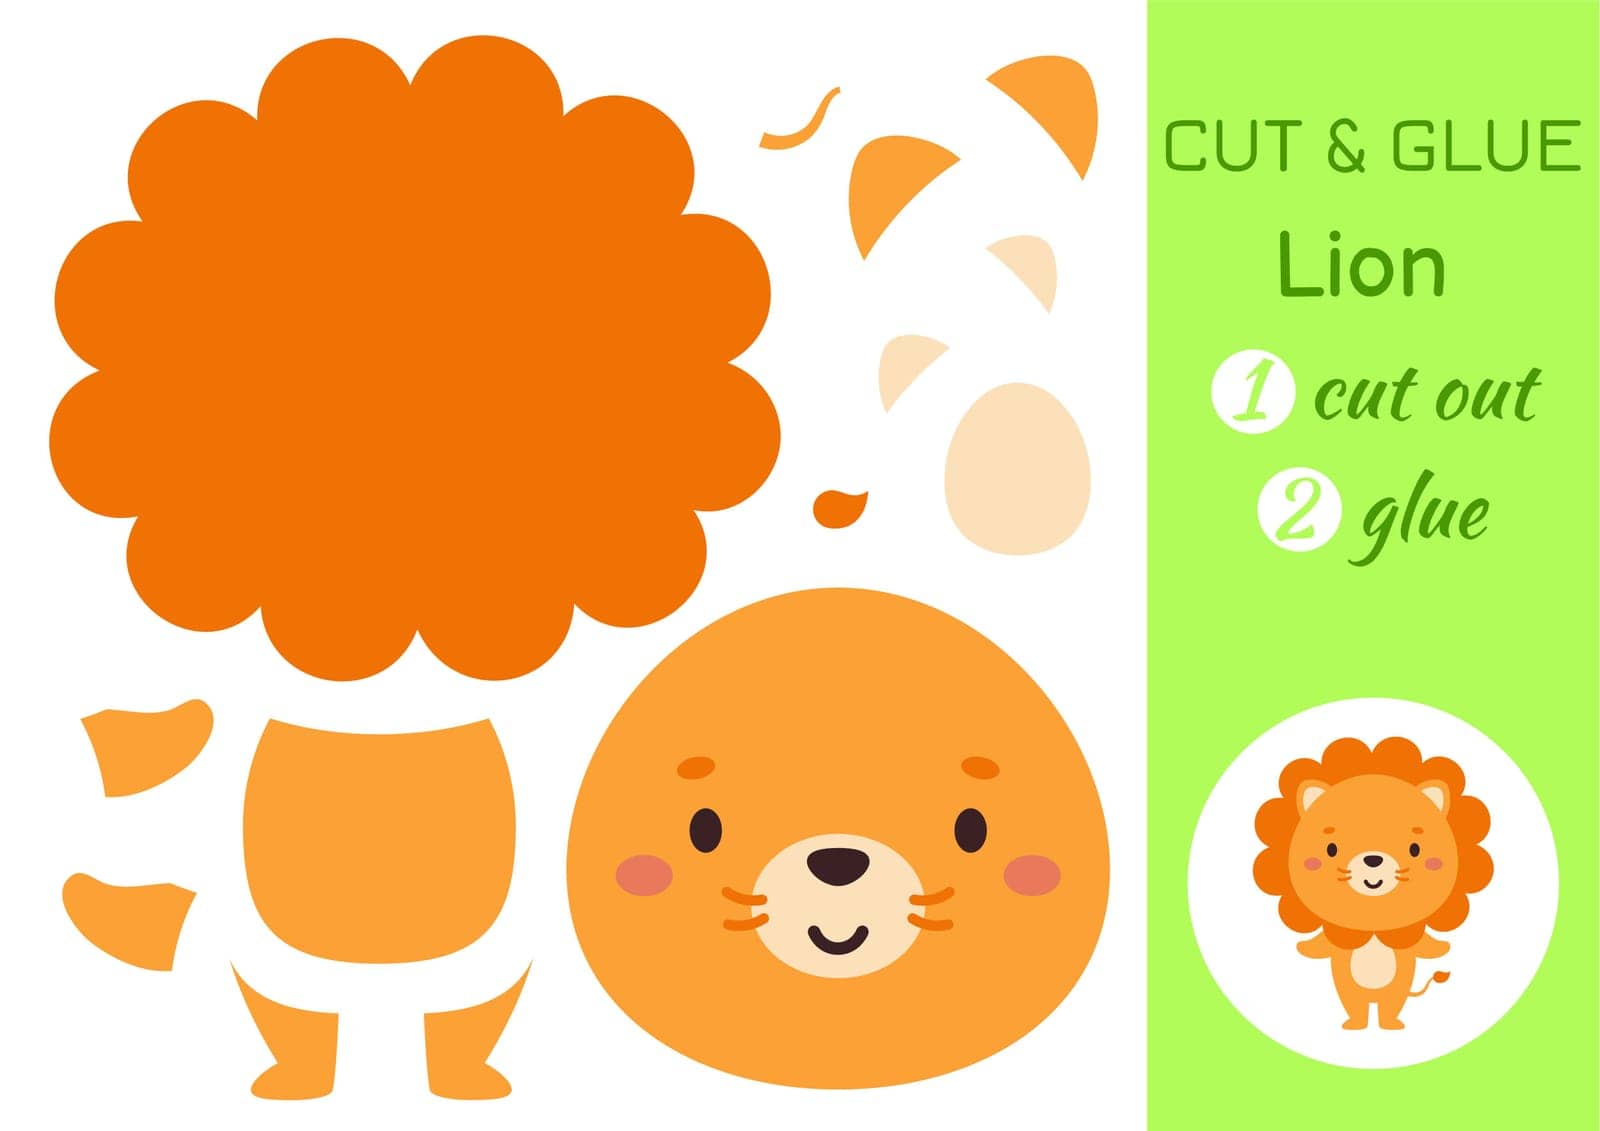 Cut and glue paper little lion. Kids crafts activity page. Educational game for preschool children. DIY worksheet. Kids art game and activities jigsaw. Vector stock illustration